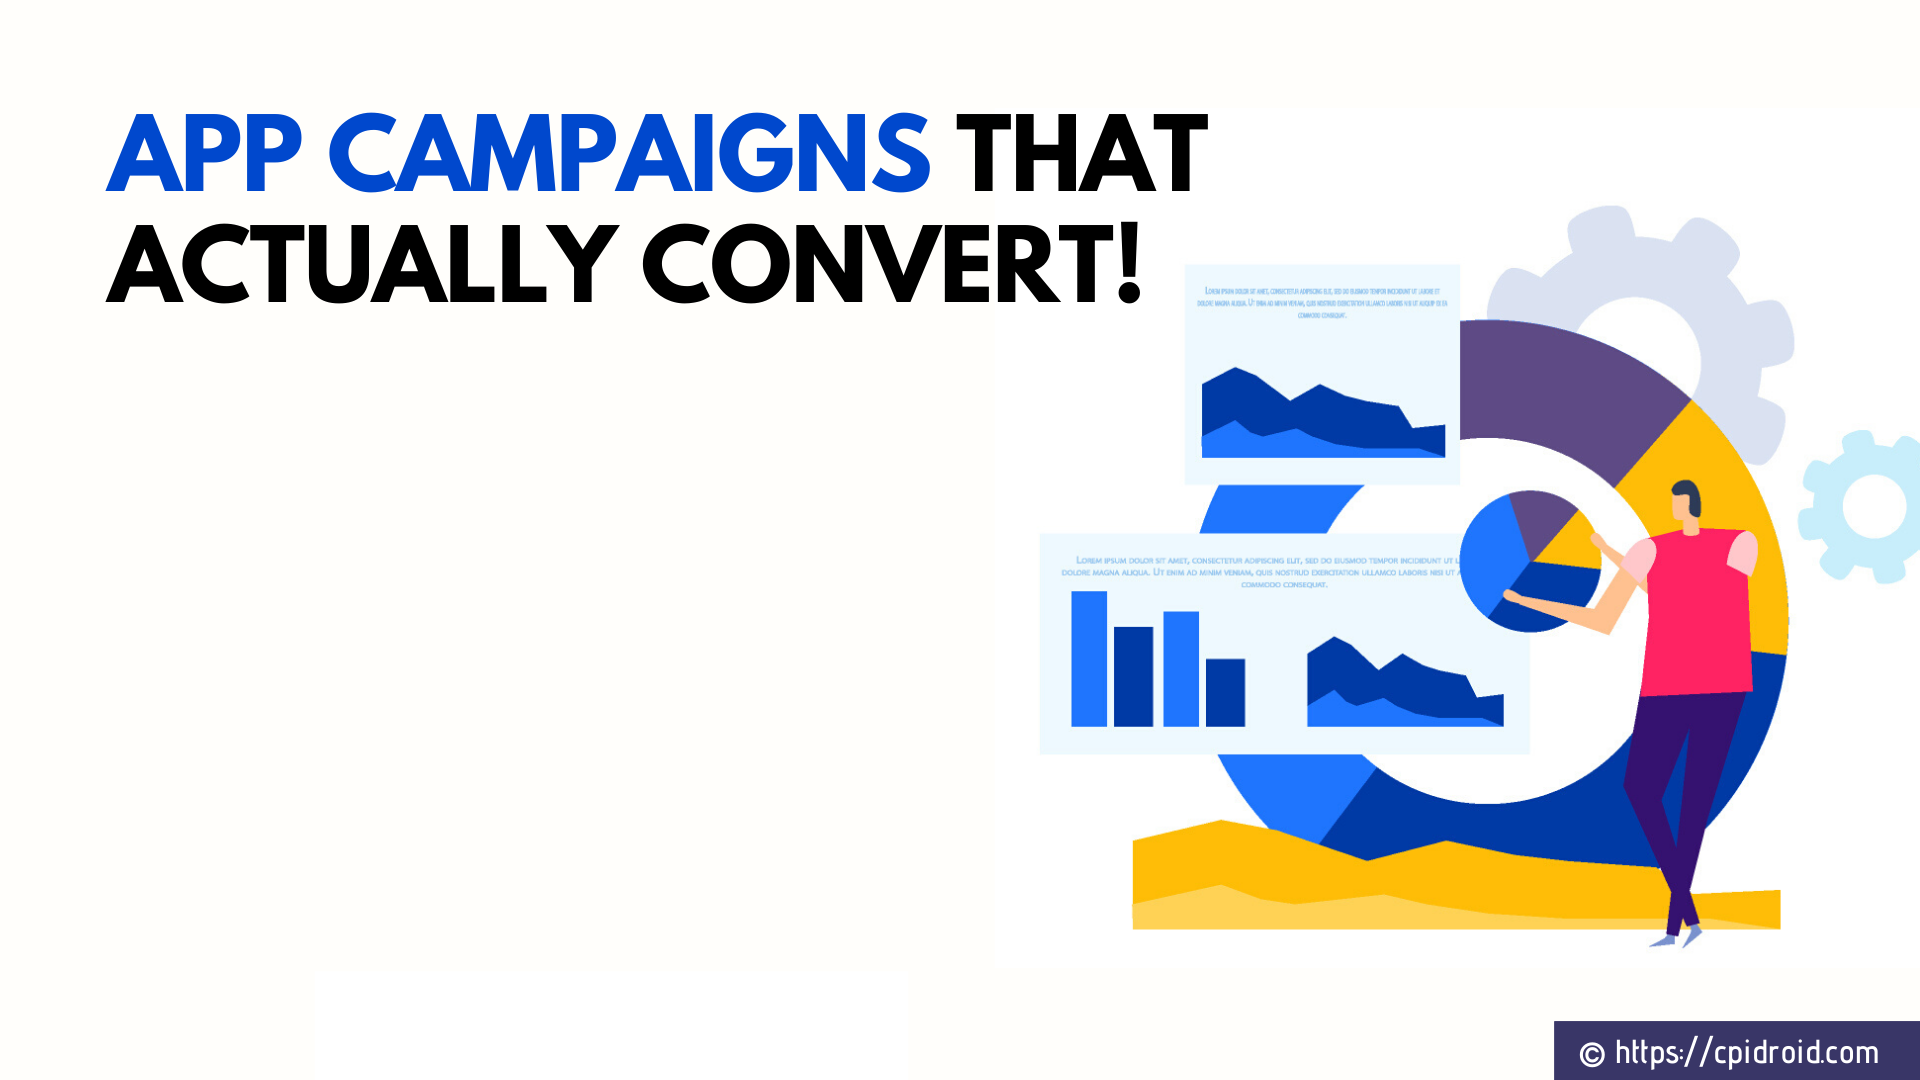 App Campaigns that actually convert!